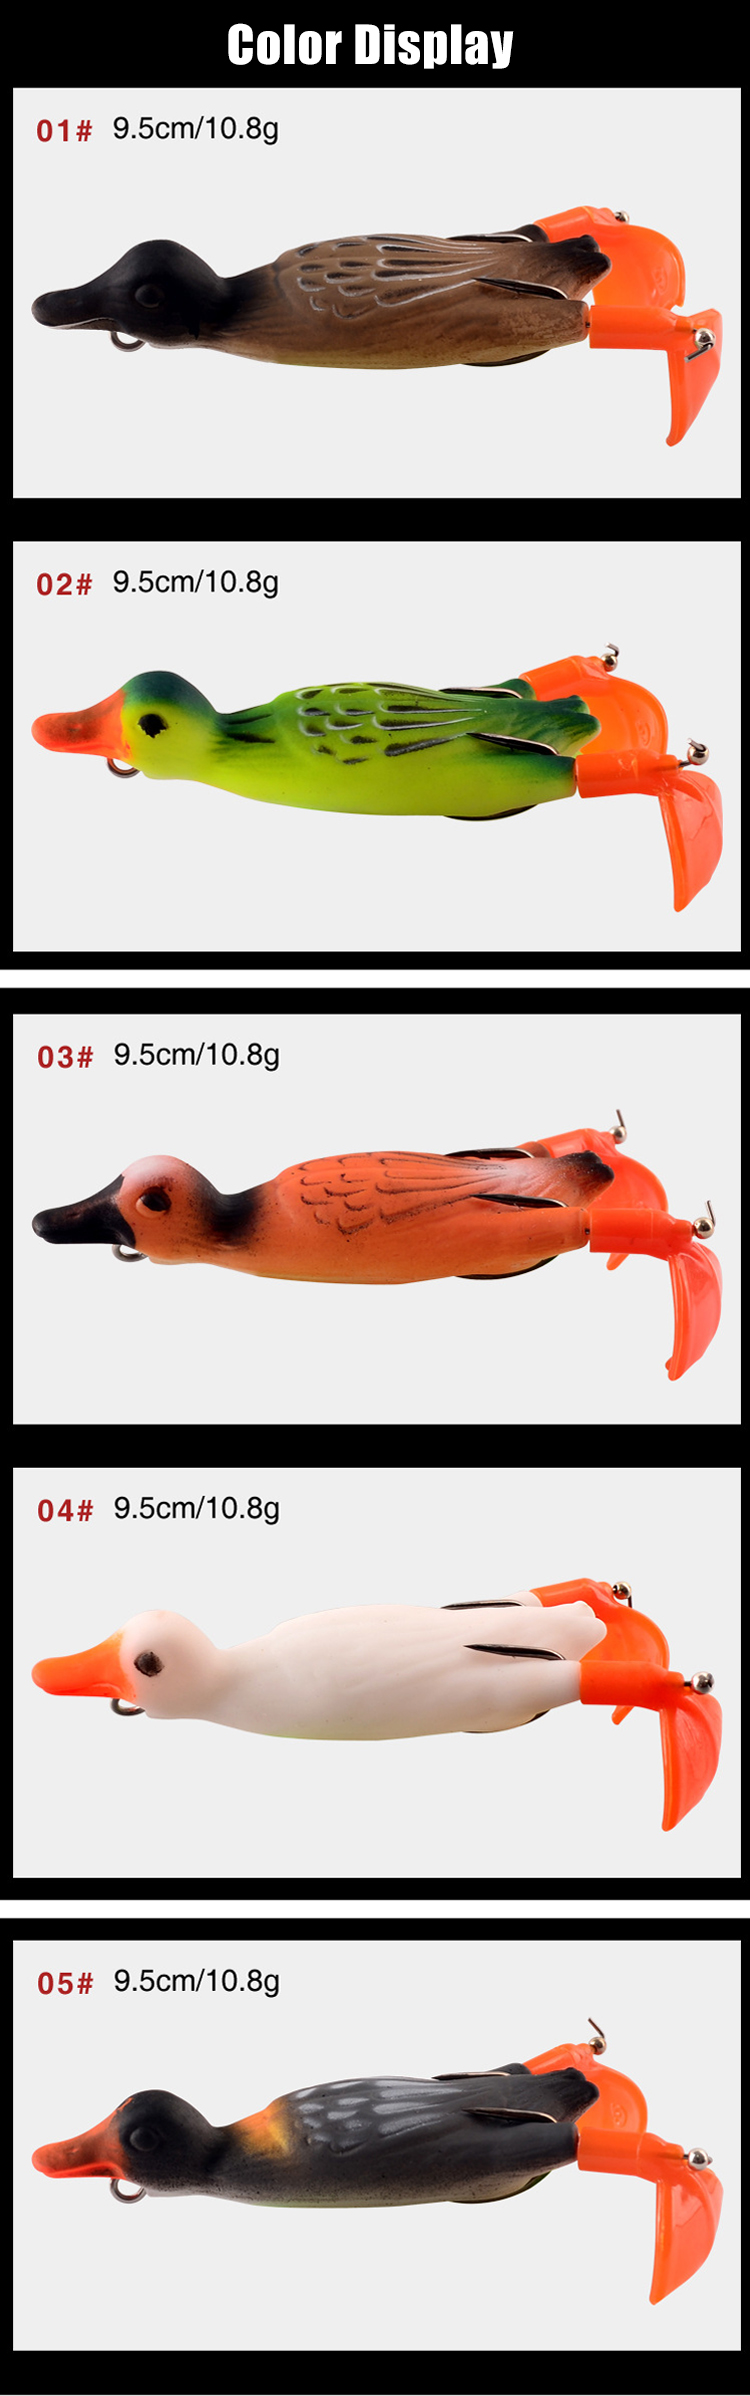 ILURE-5PCS-Fishing-Lure-Set-Duck-Shape-Propeller-Realistic-Duck-Portable-Lures-Outdoor-Fishing-Tools-1896126-2